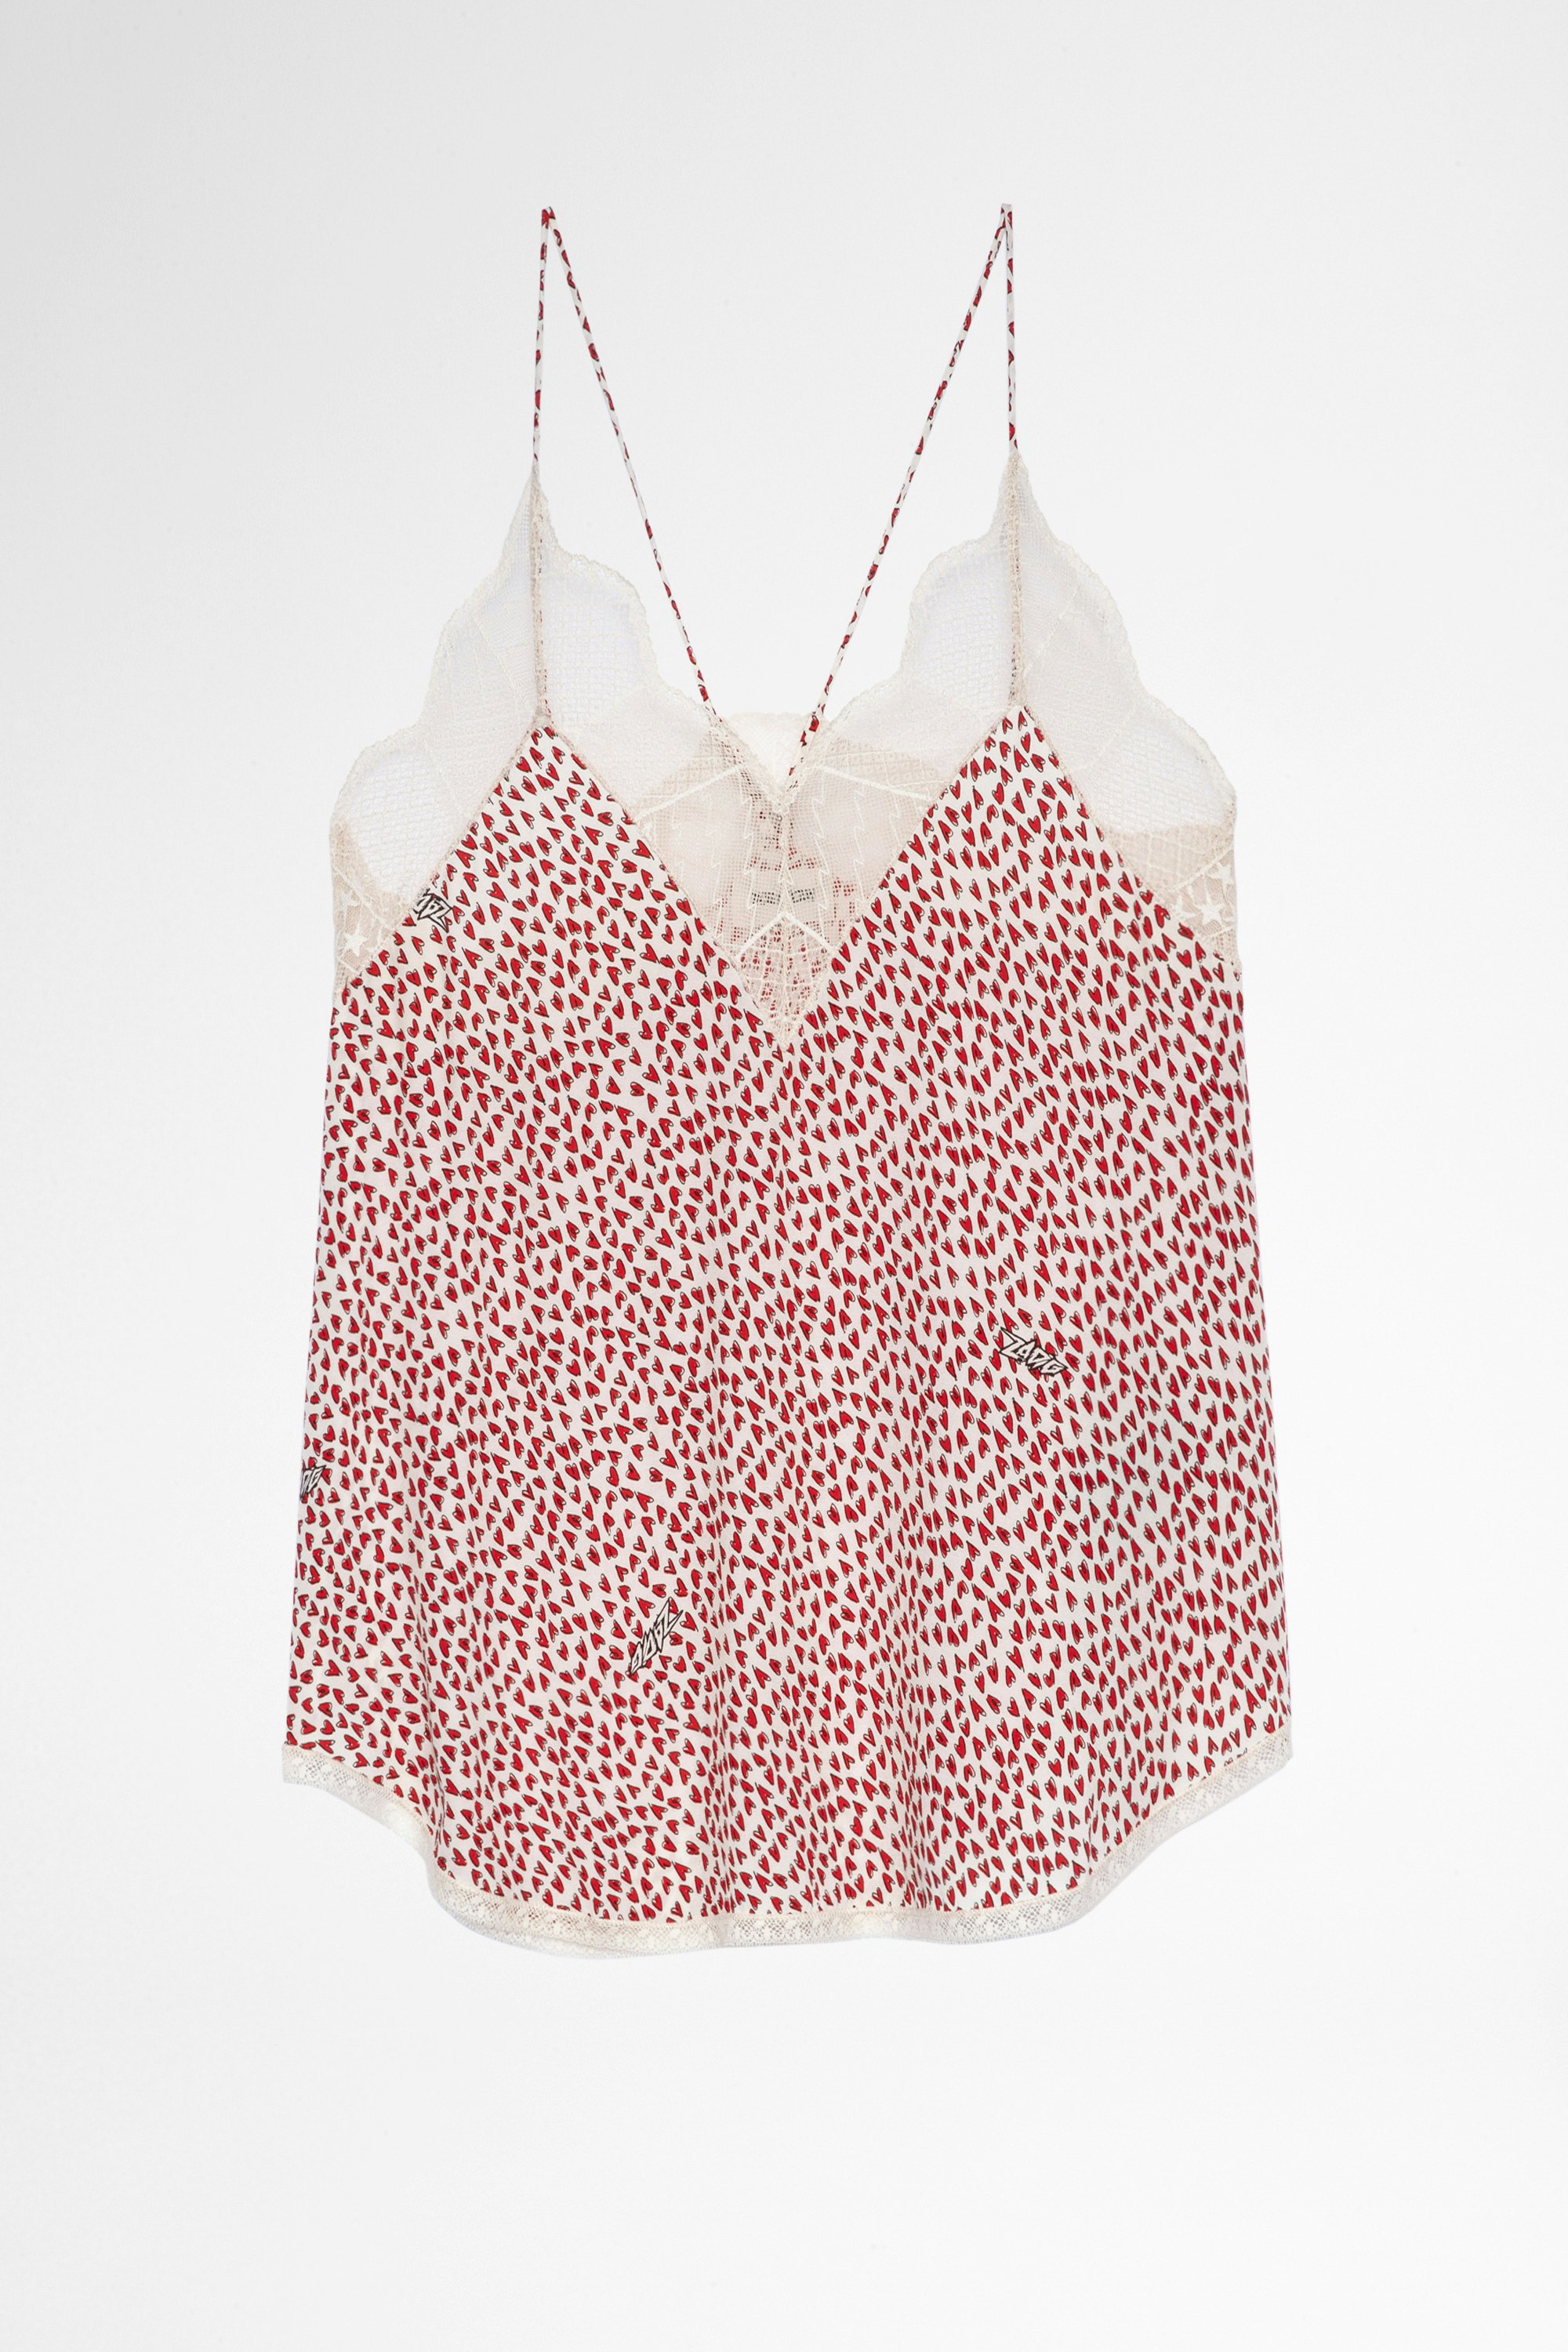 Christy キャミソール Women's beige heart-print camisole. Made with fibers from sustainably managed forests.